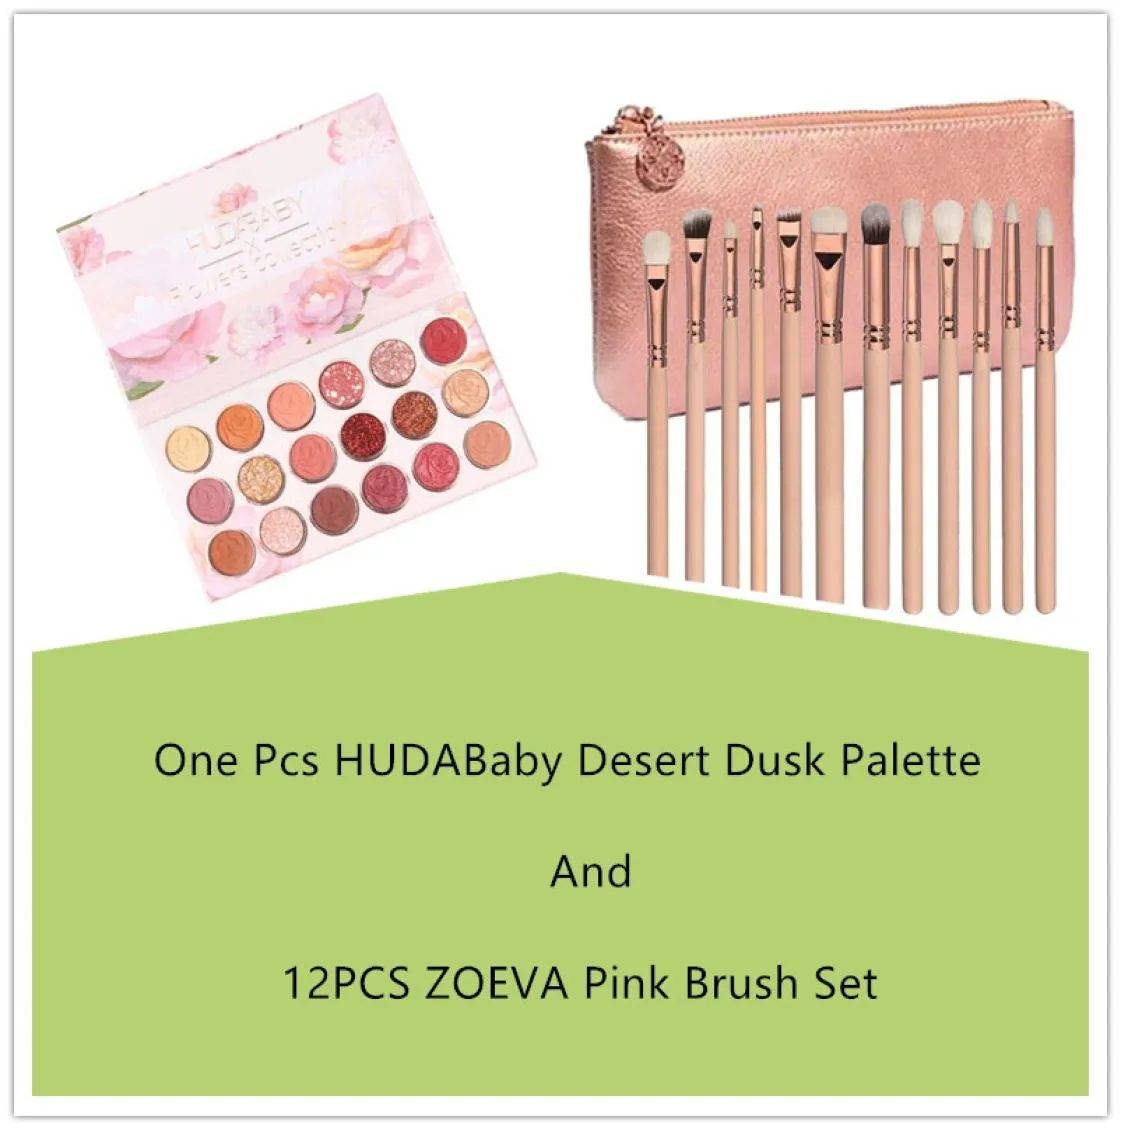 Huda Baby the New Nude Eyeshadow Palette Blendable Rose Gold Textured Shadows Neutrals Smoky Multi Reflective With Professional 4421011